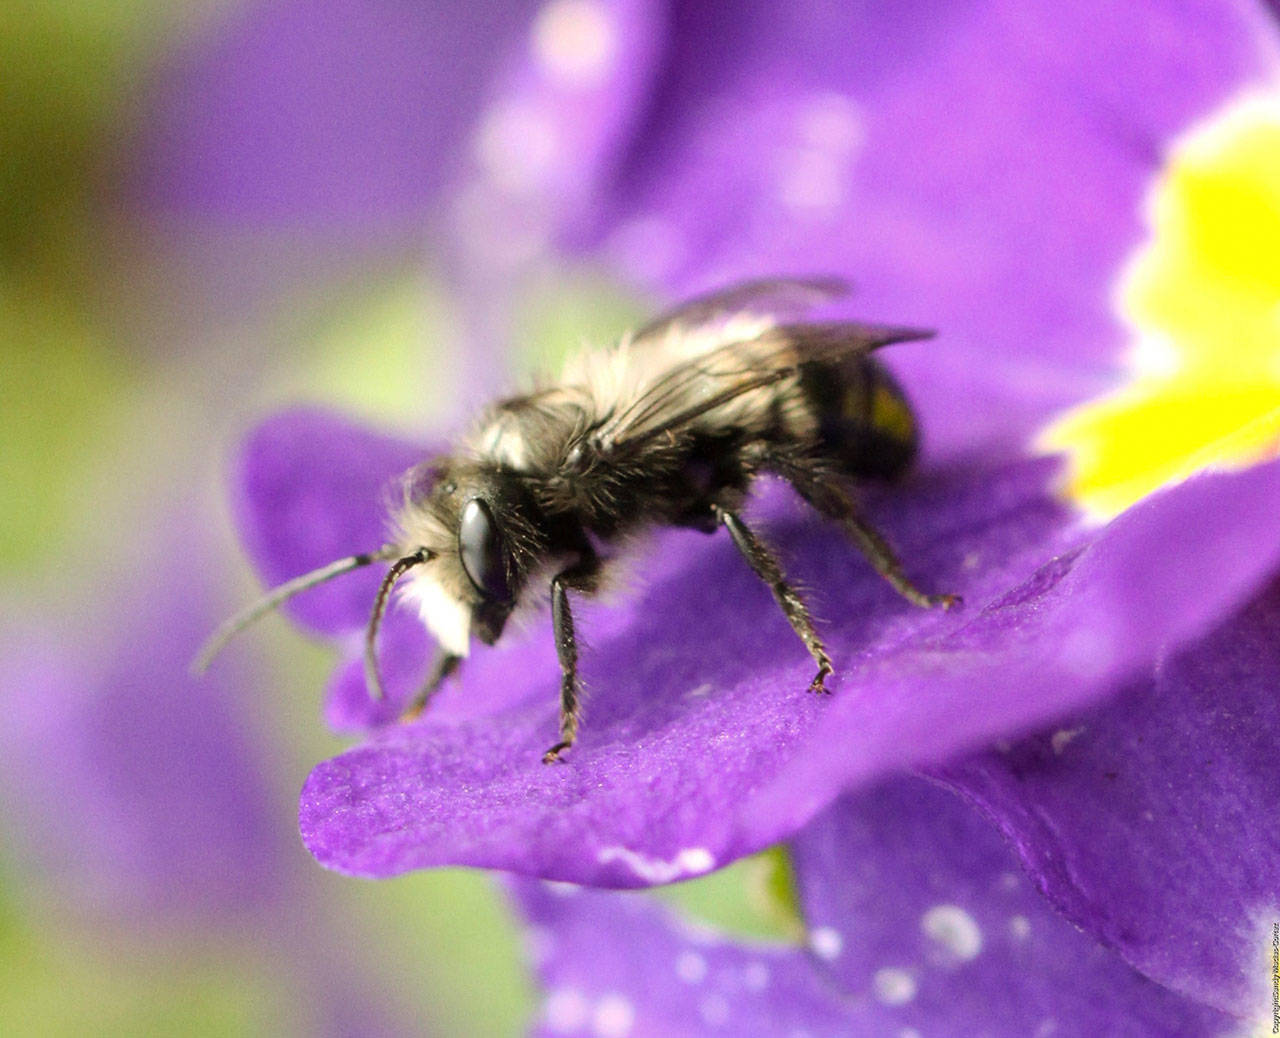 Native to Western Washington, mason bees are purportedly seven times more efficient than “honeybees” when pollinating fruit trees. Photo by Sandy Cortez